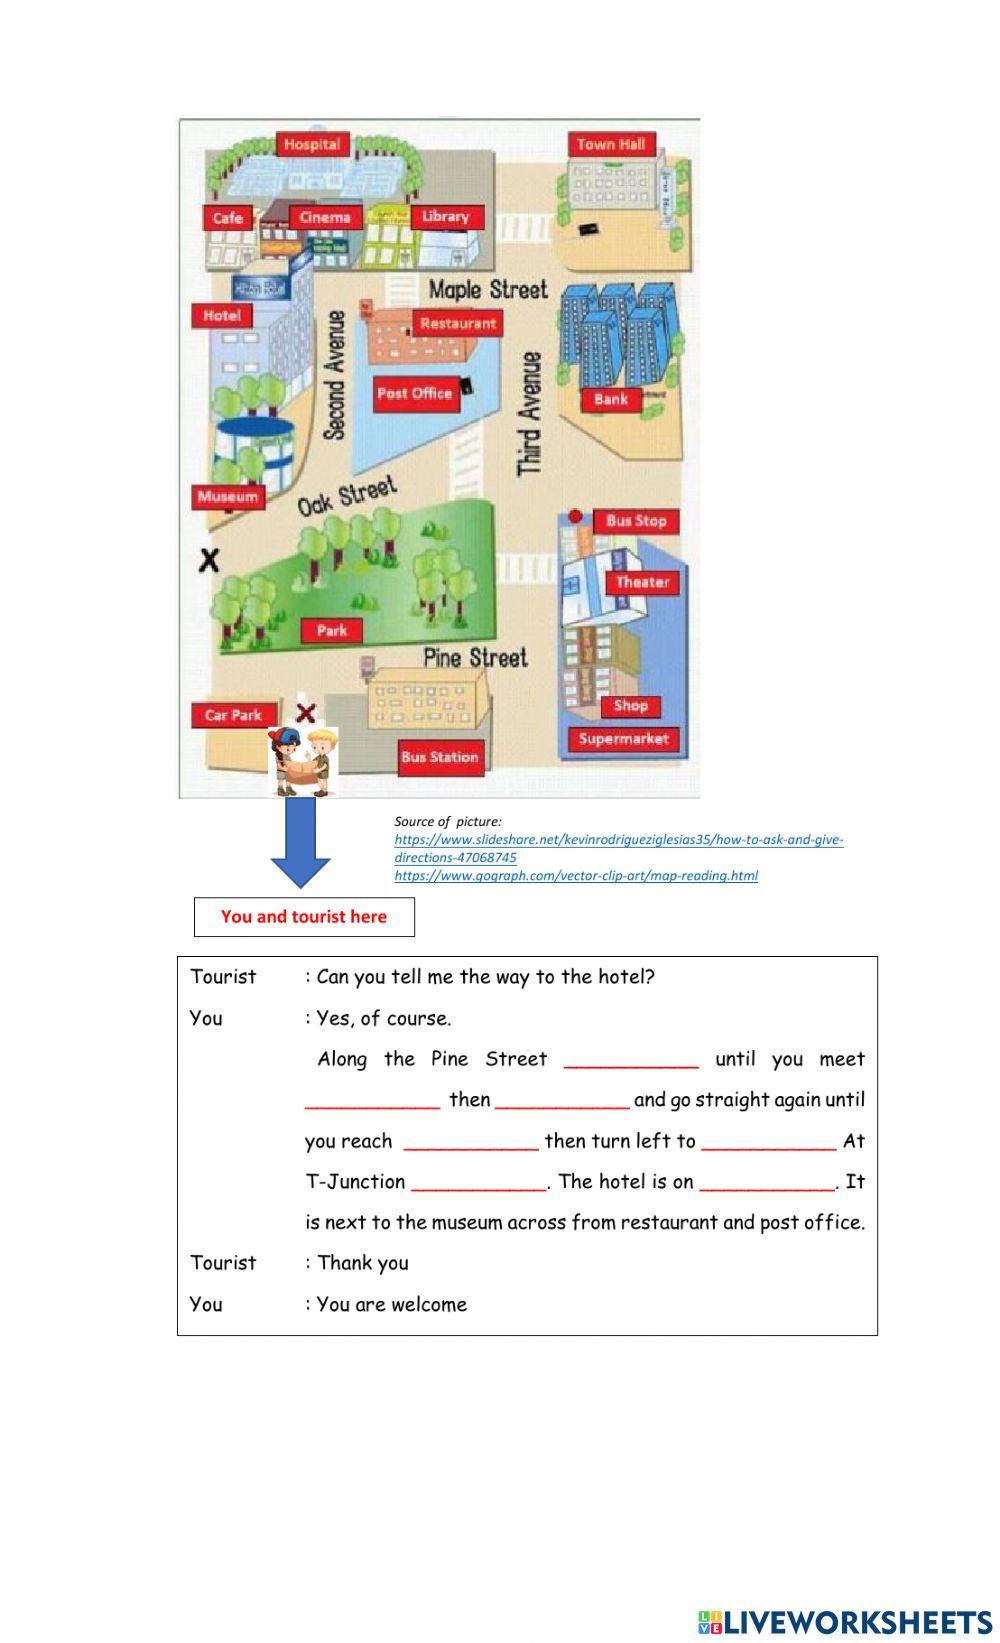 ENGLISH TEST 6 Preposition and Direction